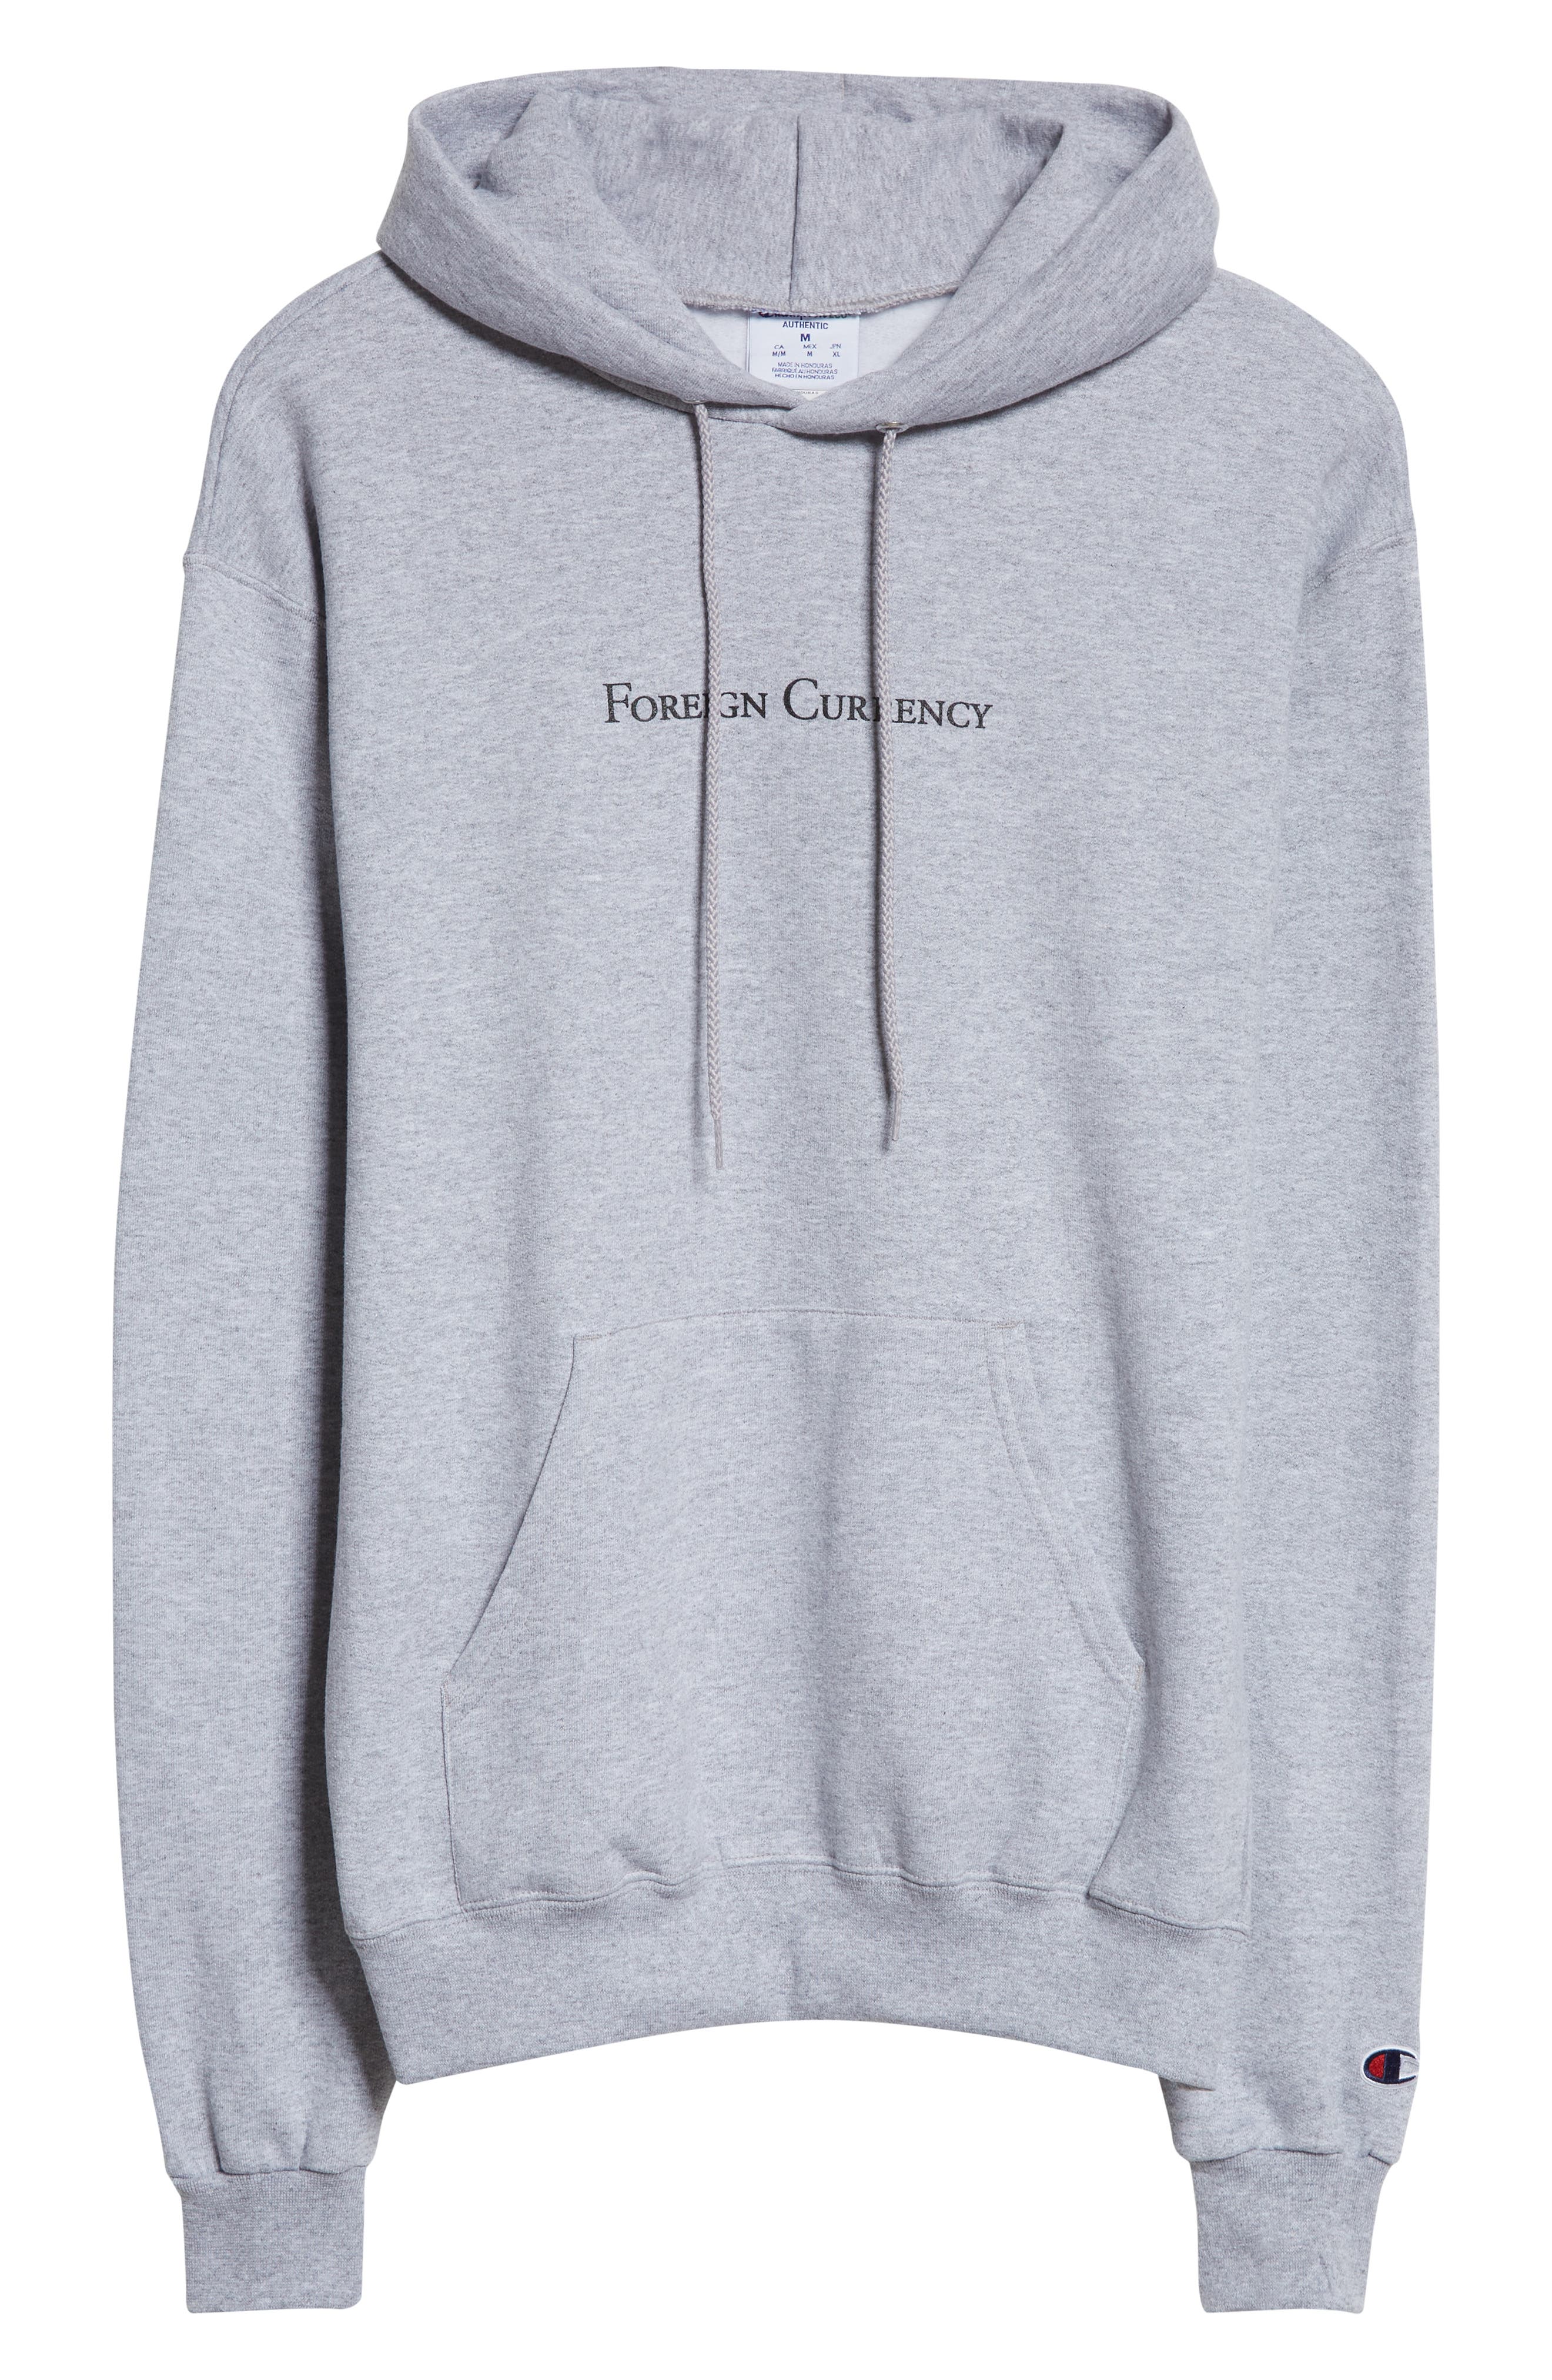 Foreign Currency Logo Champion Cotton Blend Hoodie